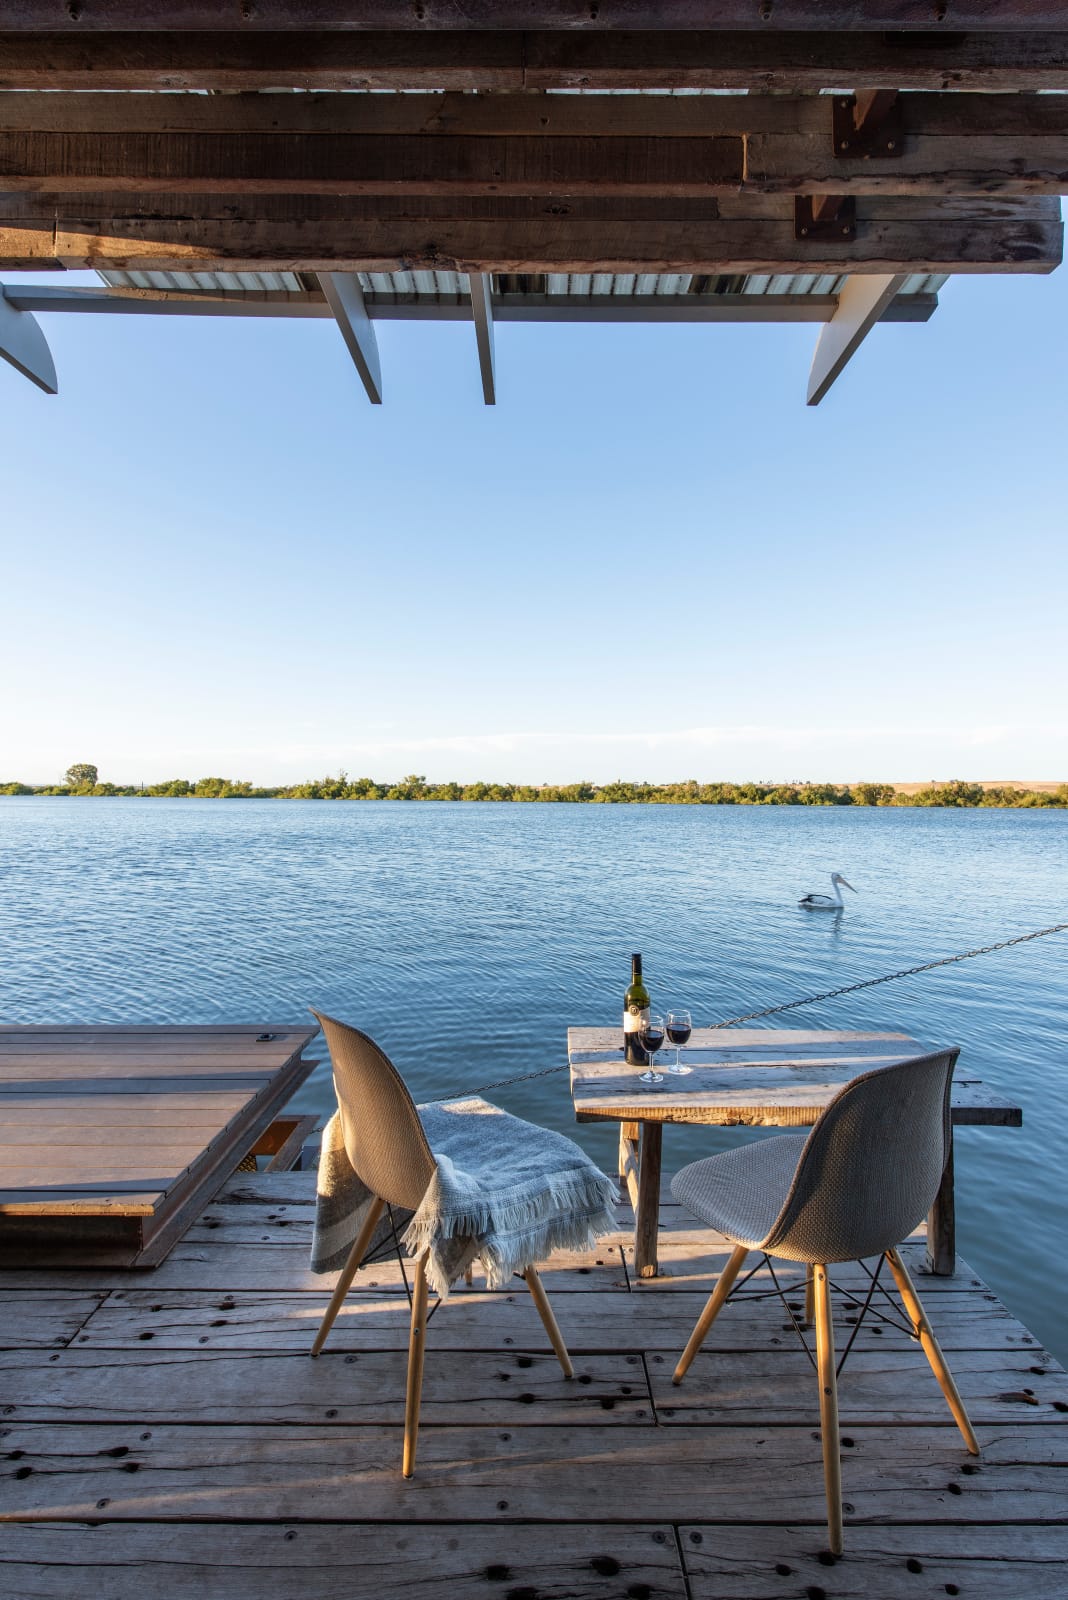 Bill's Boathouse. An exterior deck shot showing the outdoor furniture that guests can enjoy with a bottle of wine on the table